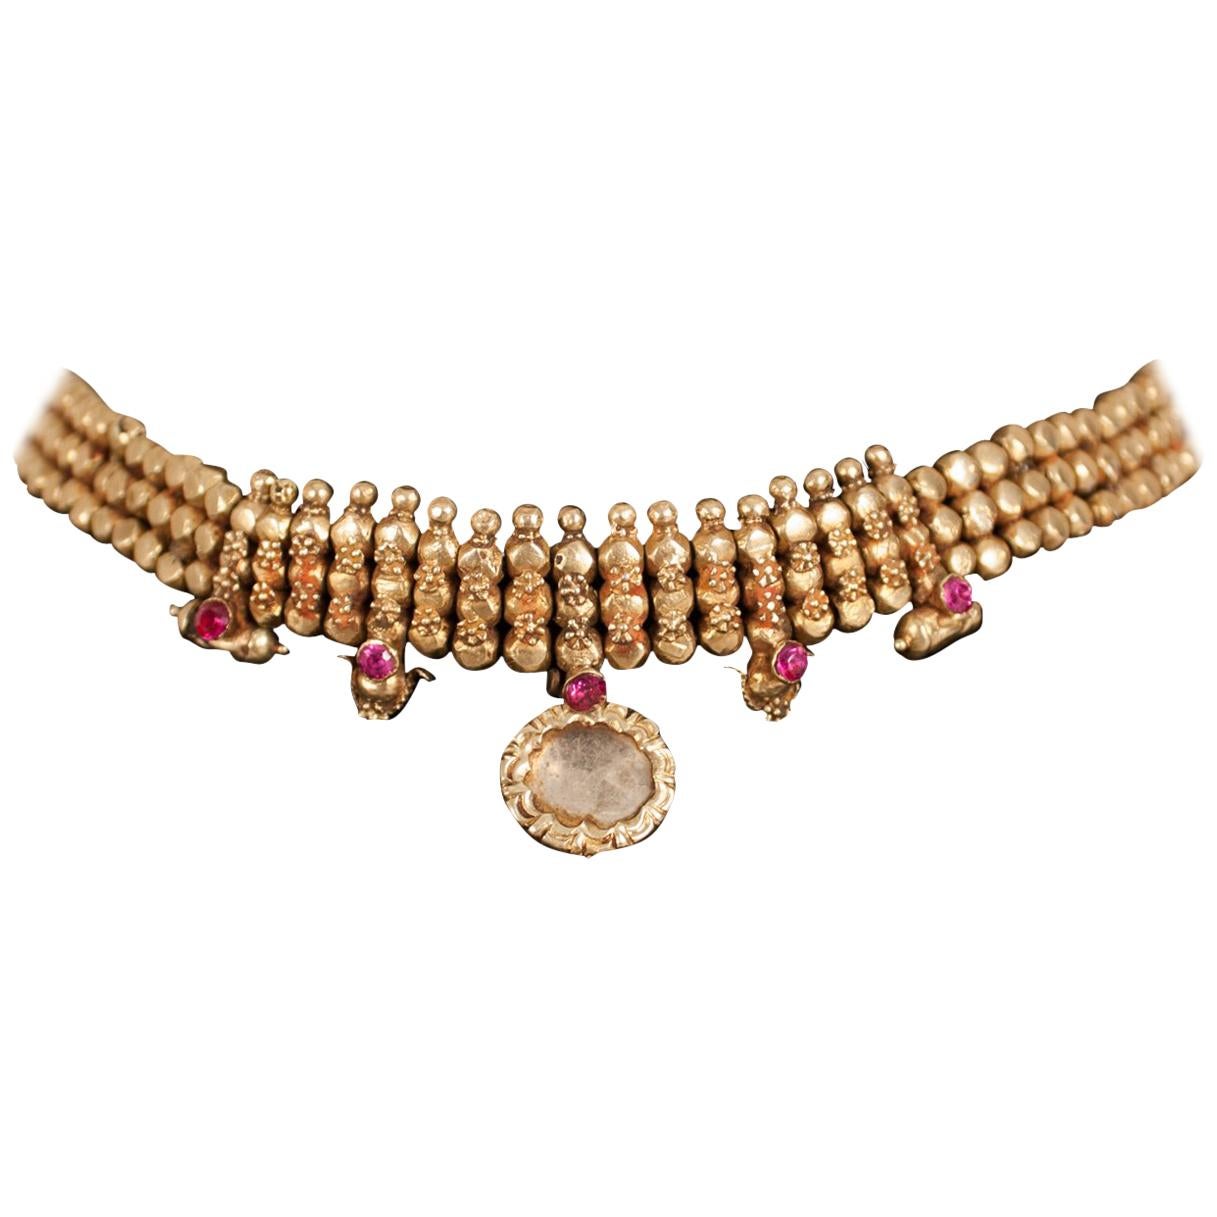 22 Karat Gold, Ruby, Crystal Choker Necklace from India For Sale